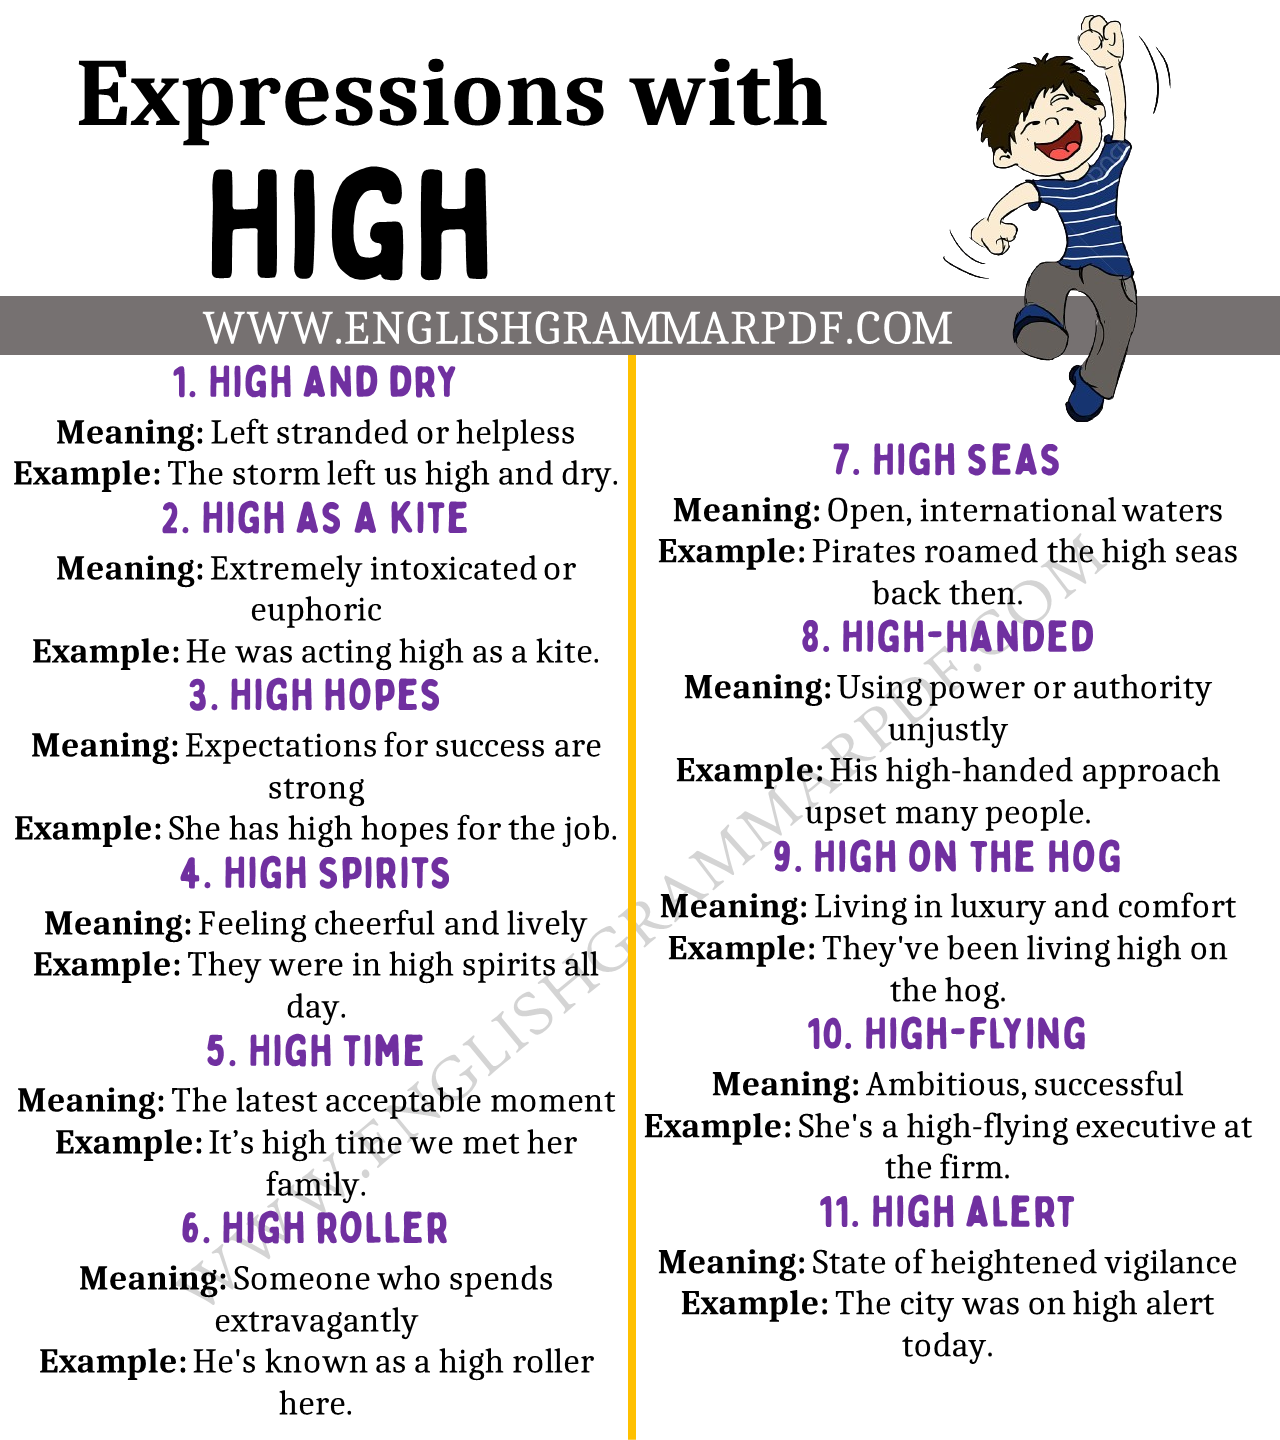 Expressions with “High”